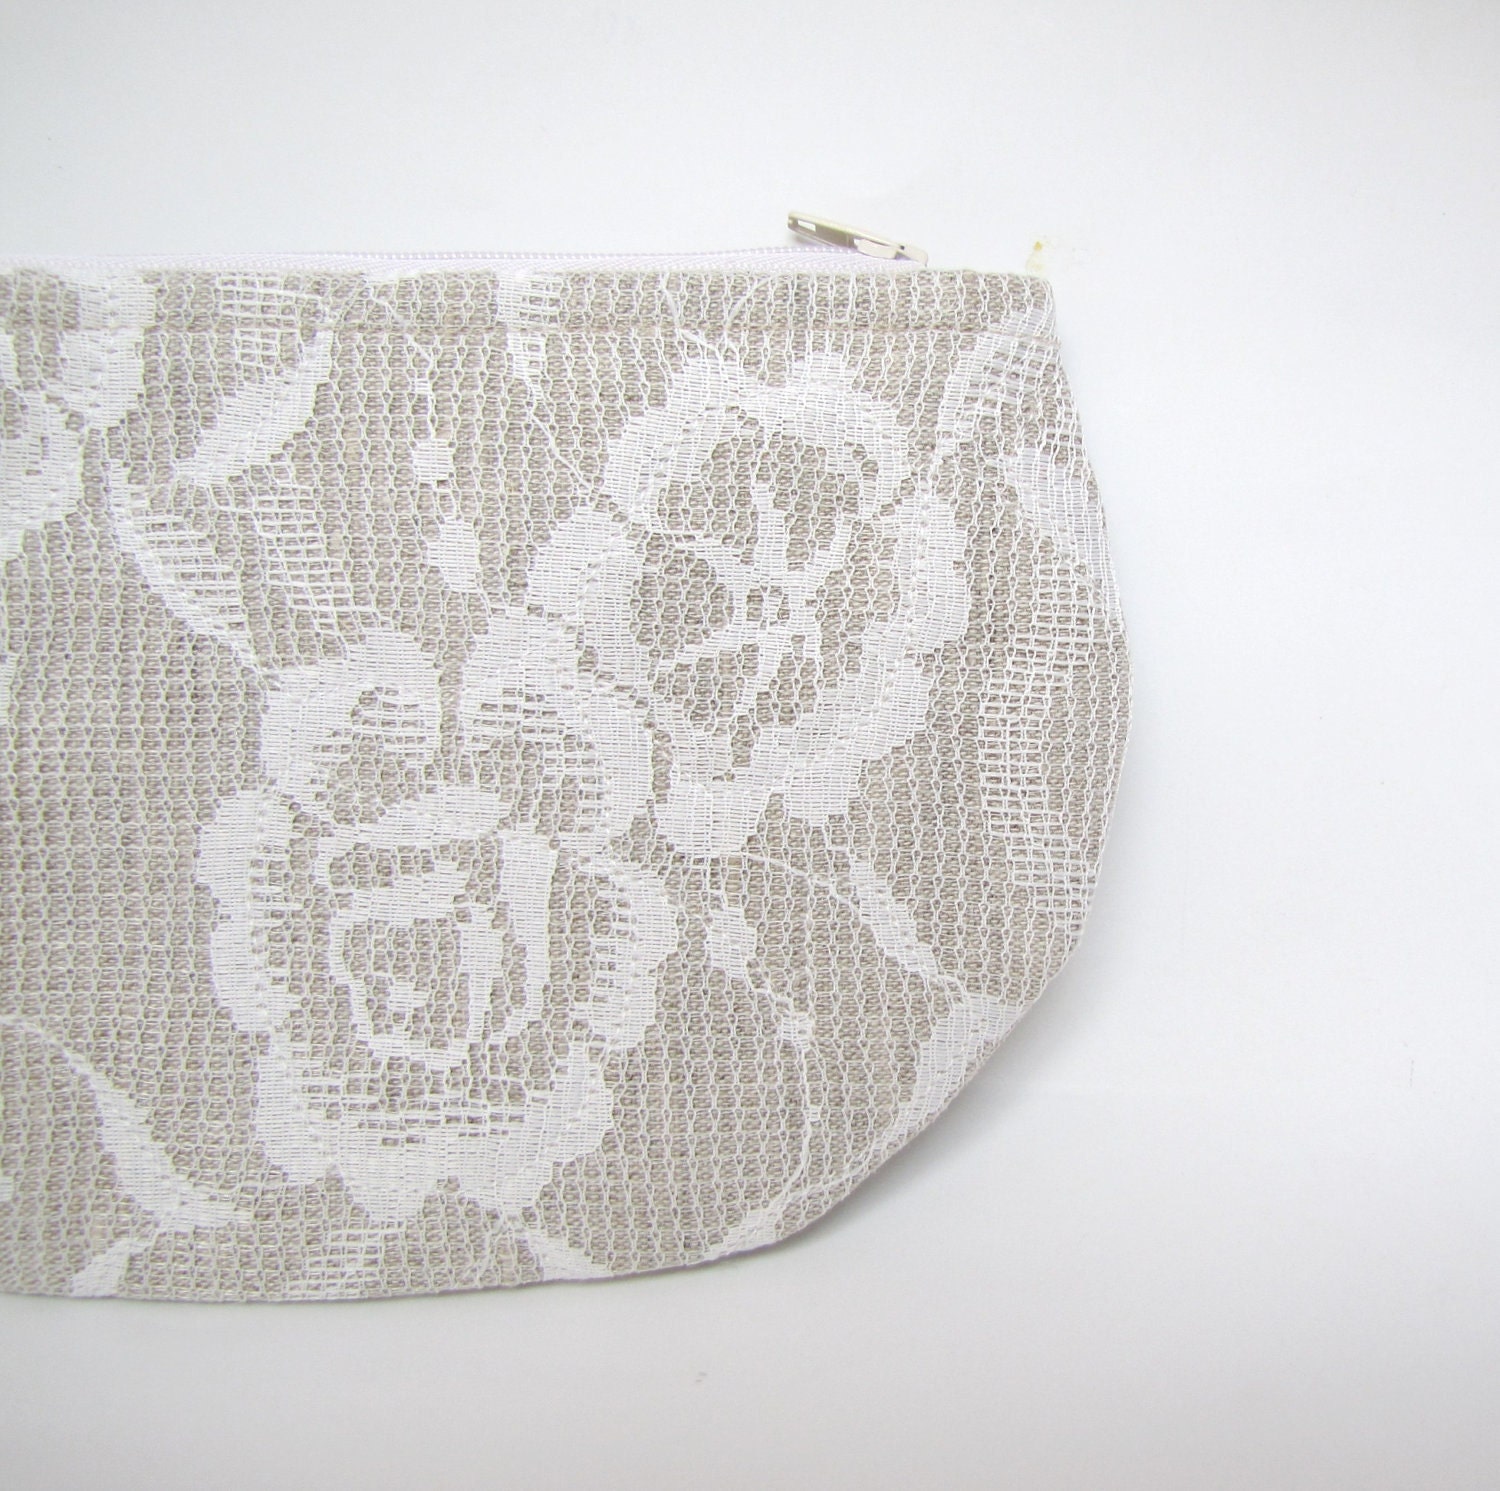 All laced up- zipper pouch, cosmetic bag, small clutch - natural linen covered with vintage lace